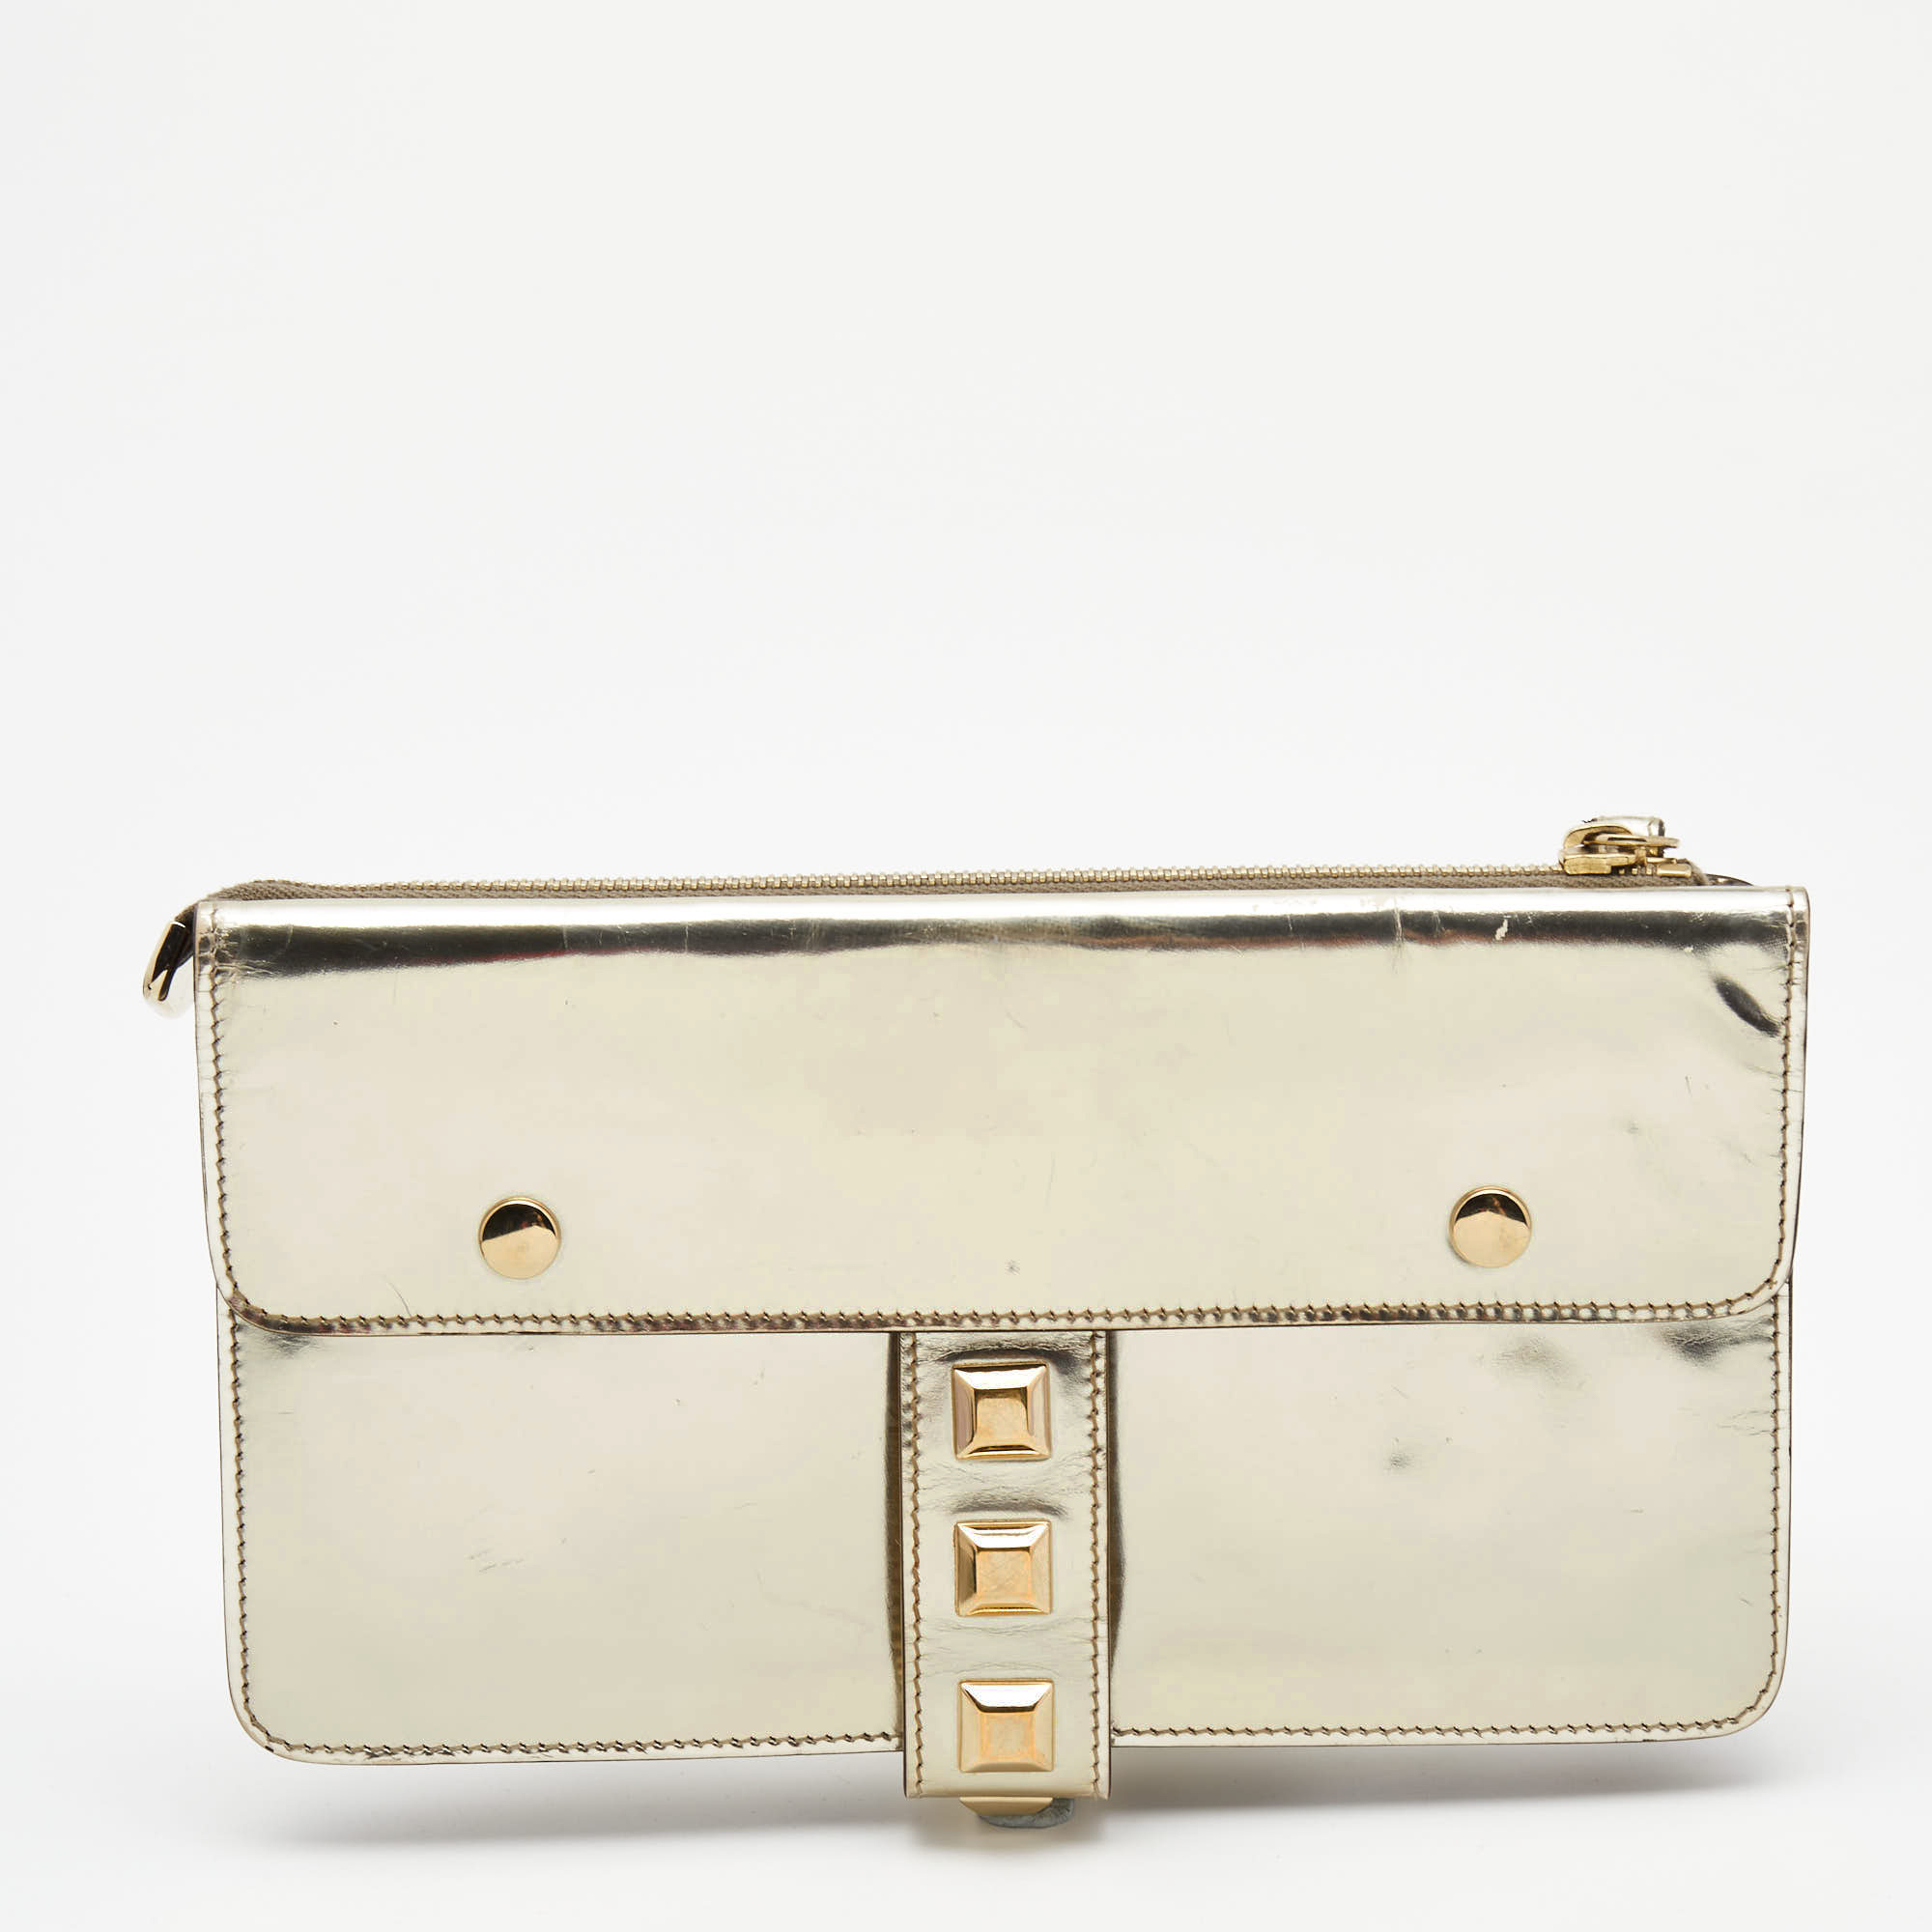 Gucci Metallic Gold Laminate Leather Studded Evening Wristlet Clutch